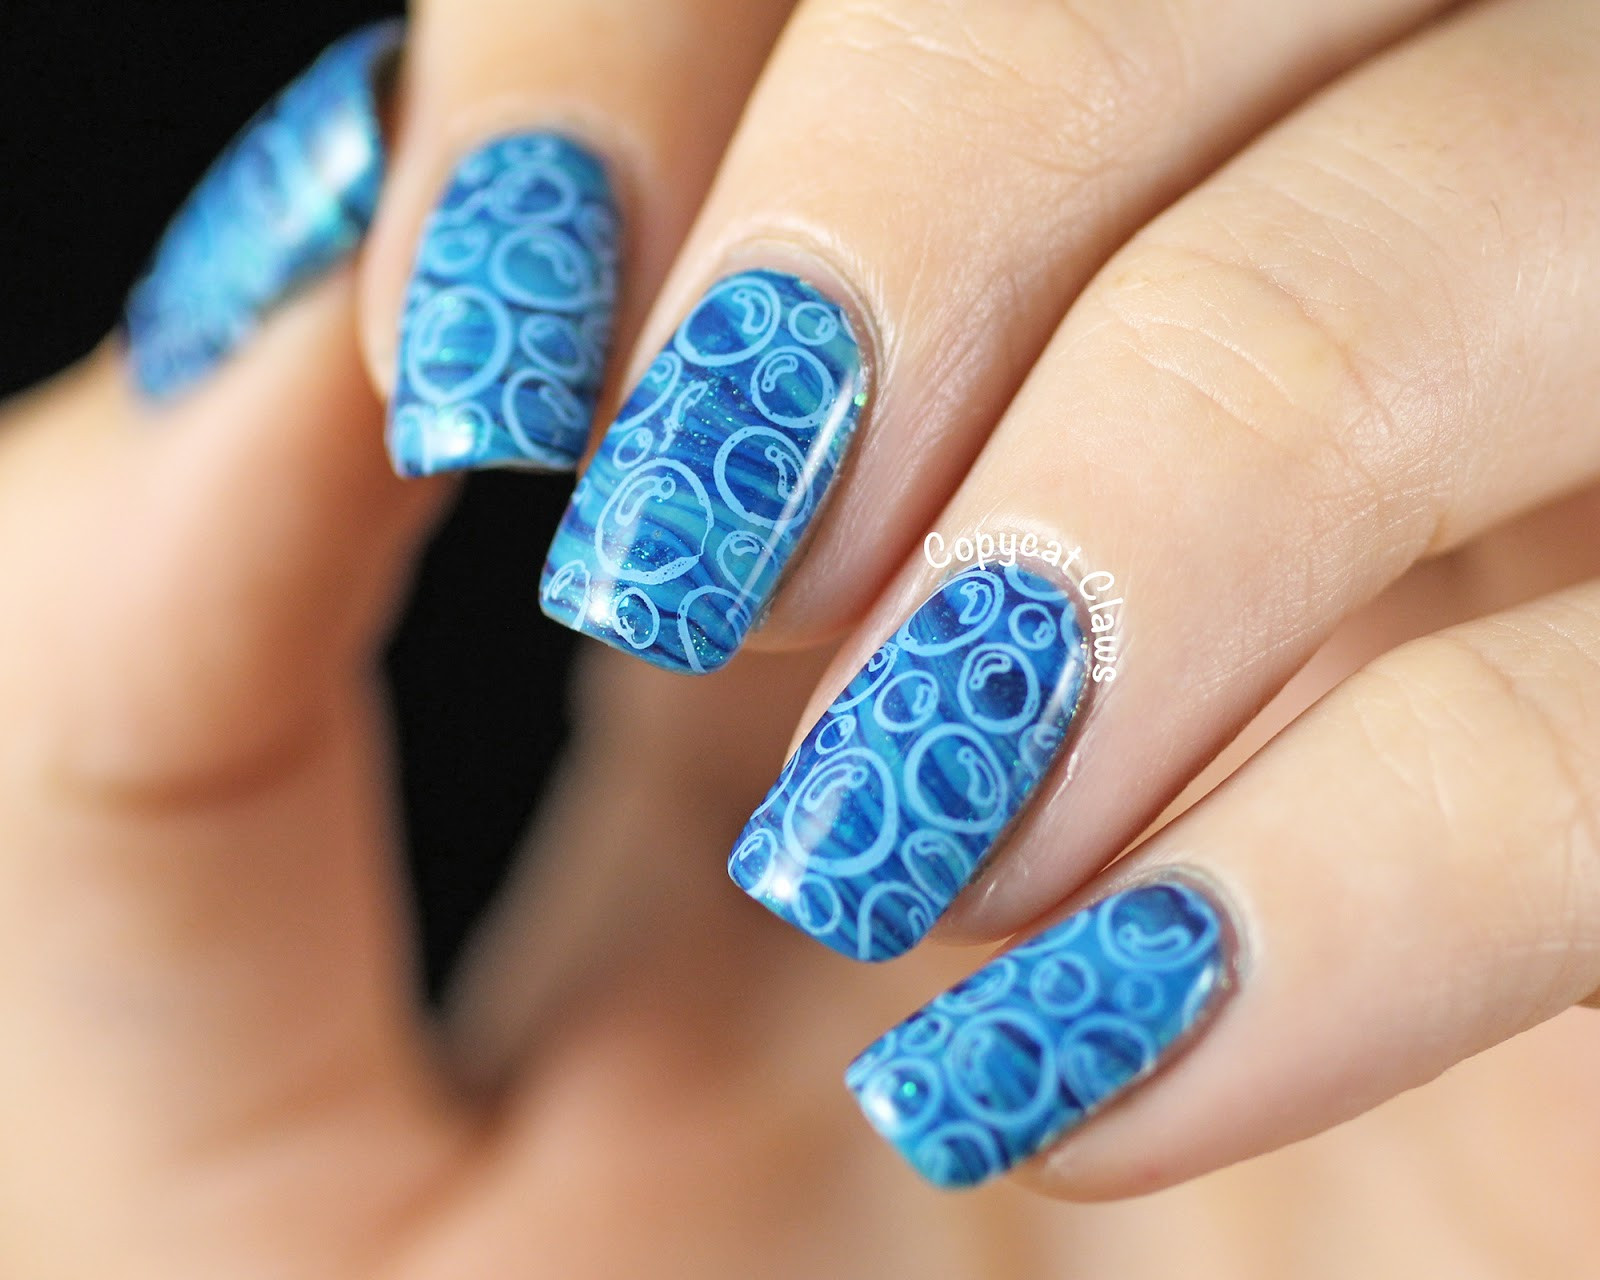 Water Marble Nail Designs
 Copycat Claws 31DC2014 Day 20 Blue Water Marble Nail Art